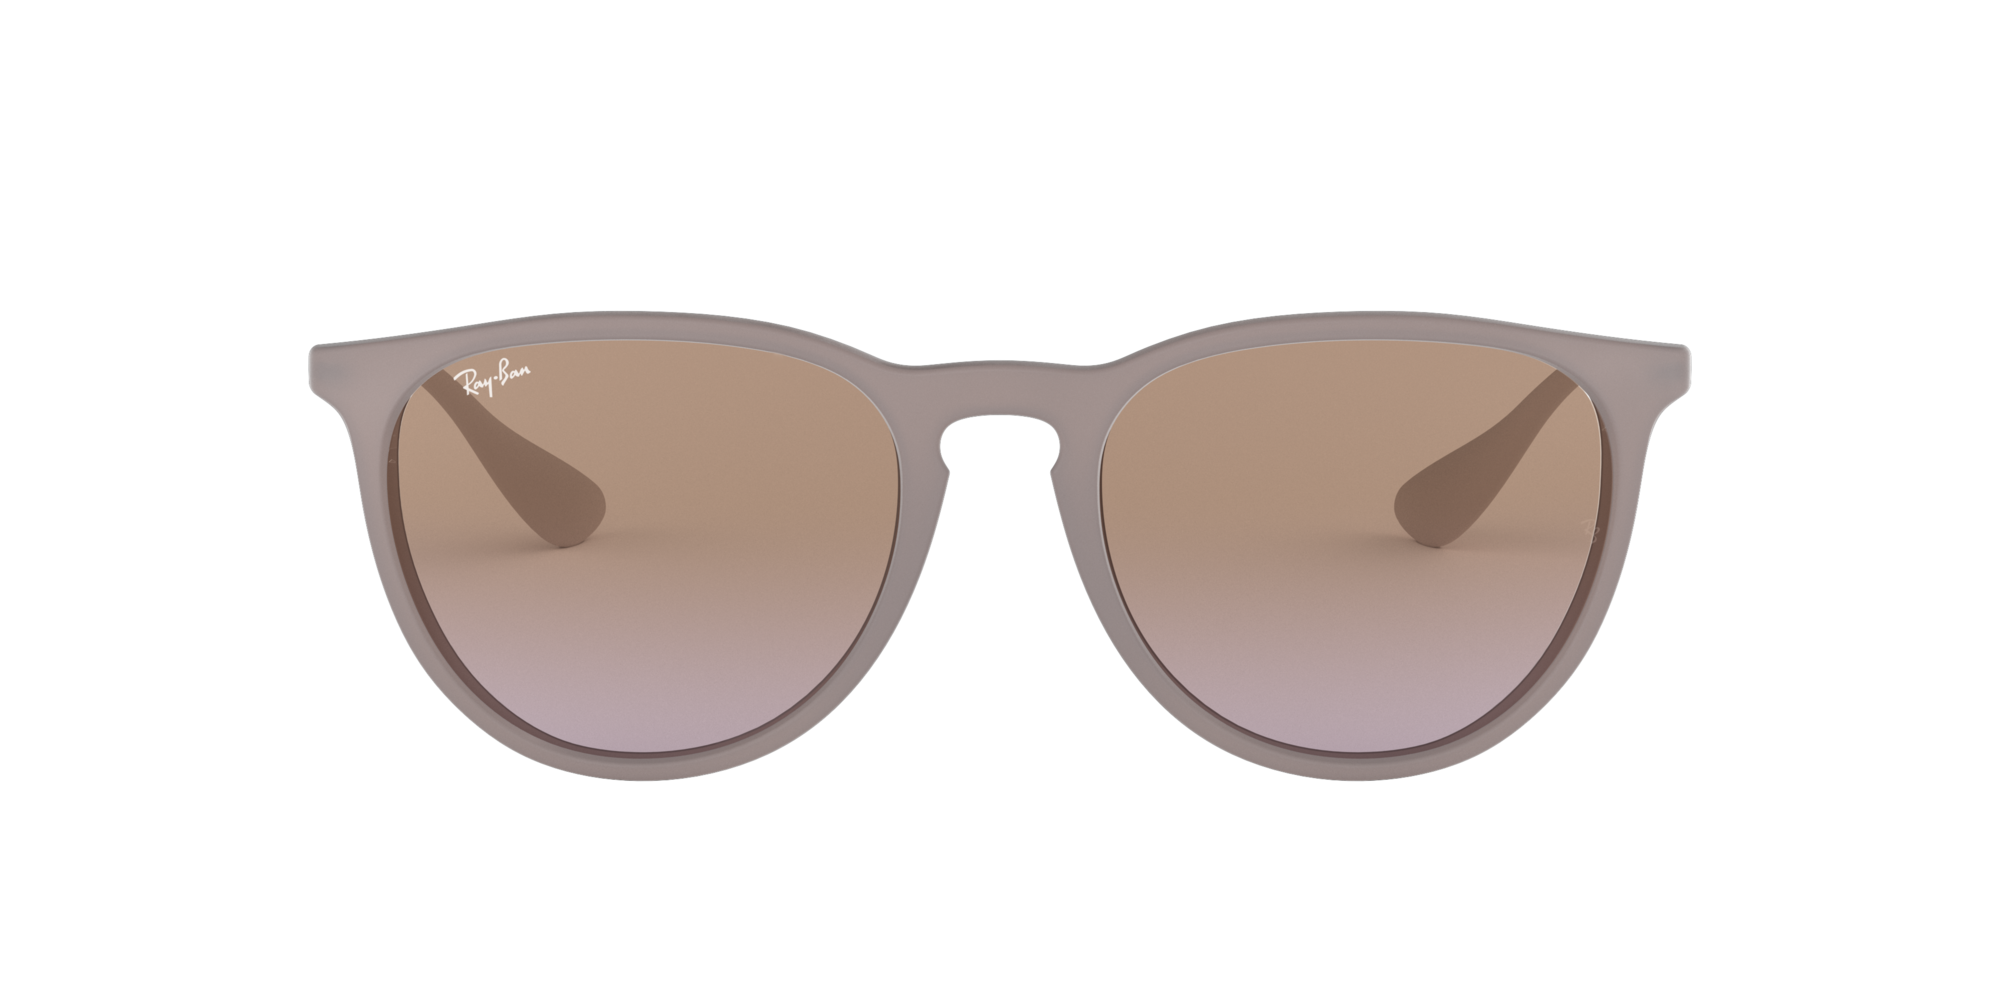 Ray-Ban ERIKA Sonnenbrille RB4171 6000/68 54